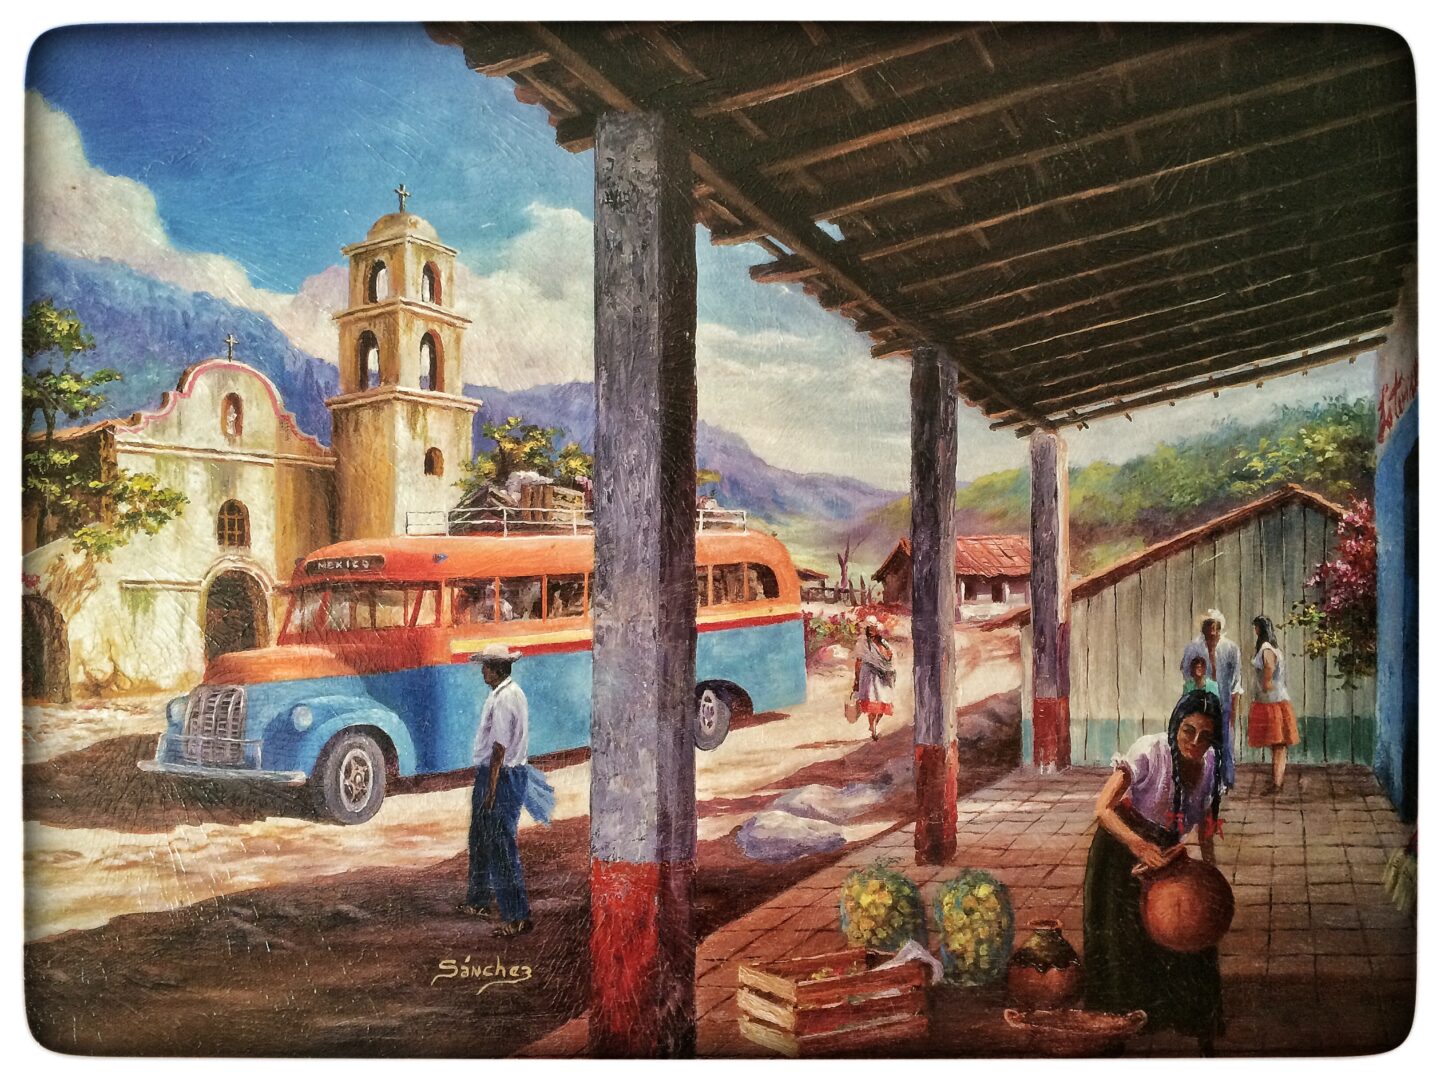 A painting of a bus in front of a house.